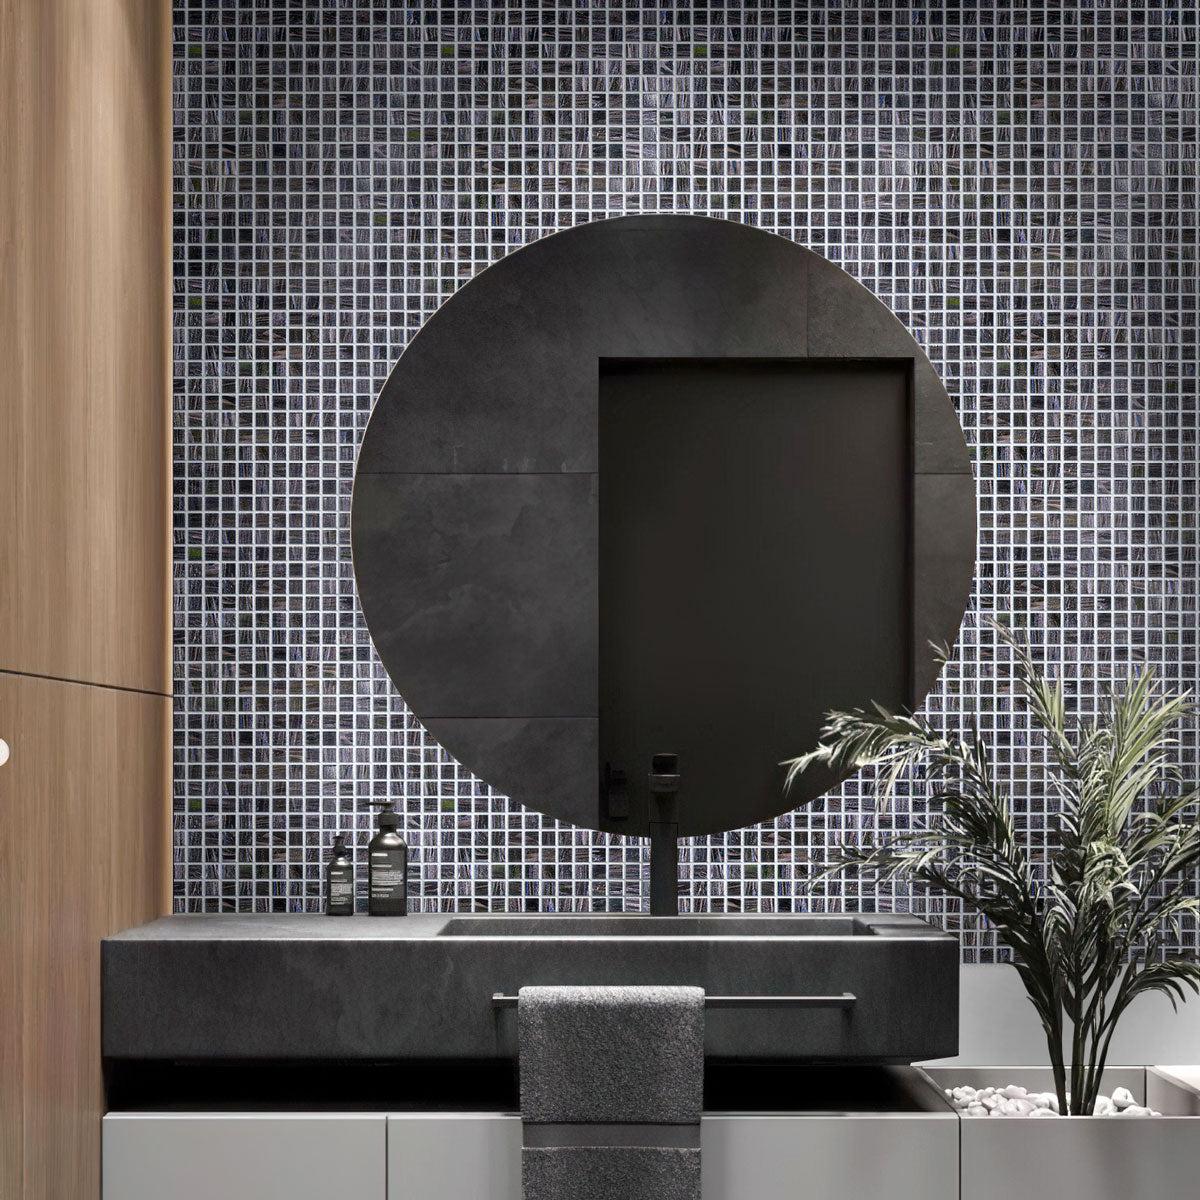 This lavish bathroom glistens with Brushed Sparkly Pearl Black Squares Glass Pool Tile